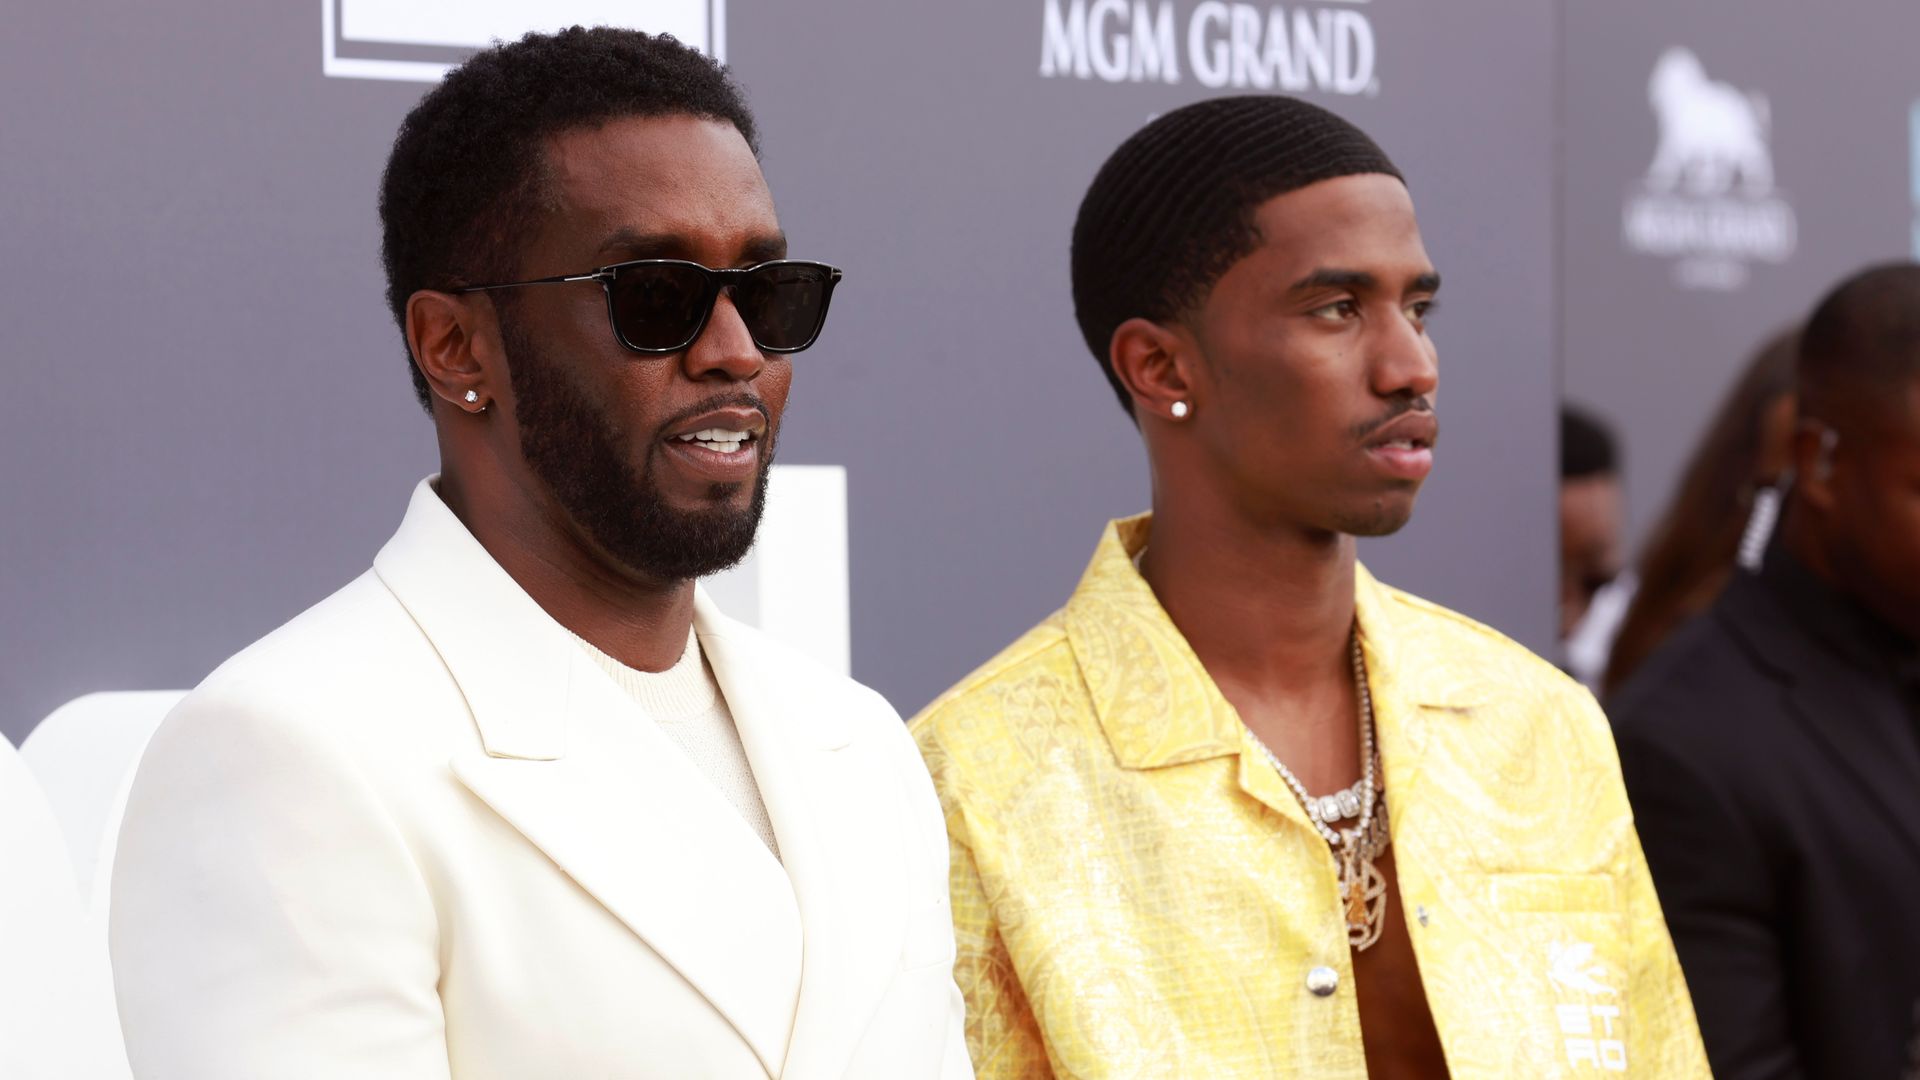 Sean "Diddy" Combs and Christian Combs attend the 2022 Billboard Music Awards at MGM Grand Garden Arena on May 15, 2022 in Las Vegas, Nevada